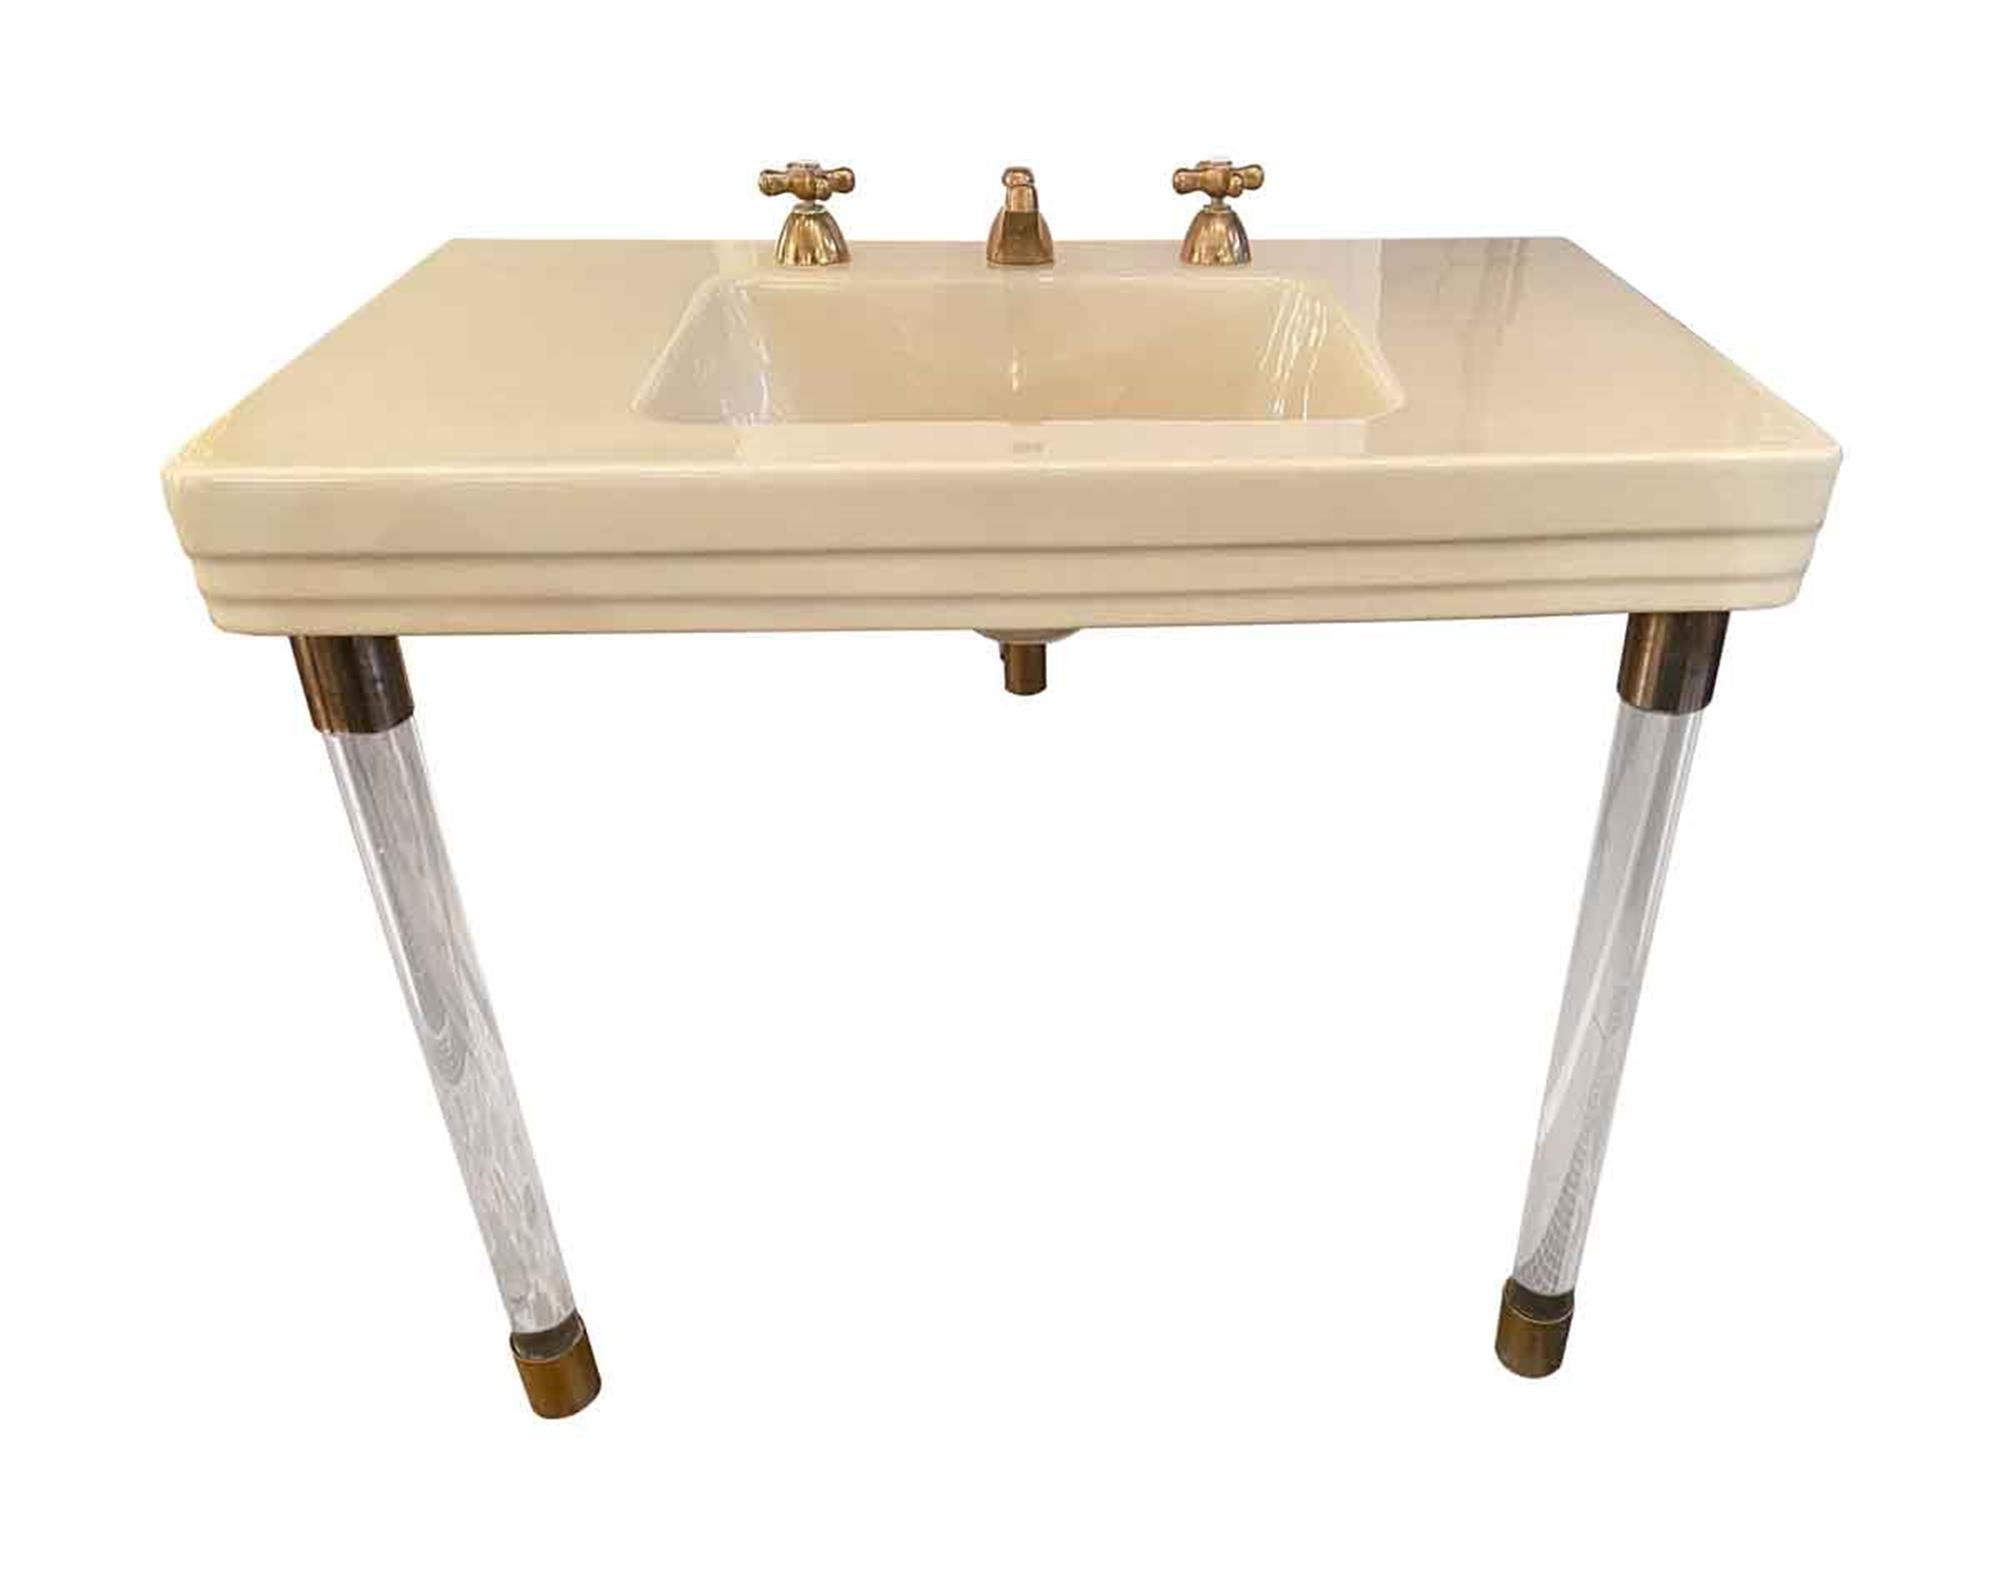 Large 1931 Art Deco American standard console sink from the Waldorf Astoria Hotel in NYC. The sink features brass hardware and Lucite legs. It was removed from the Hotel prior to the current restoration. There are others available with different